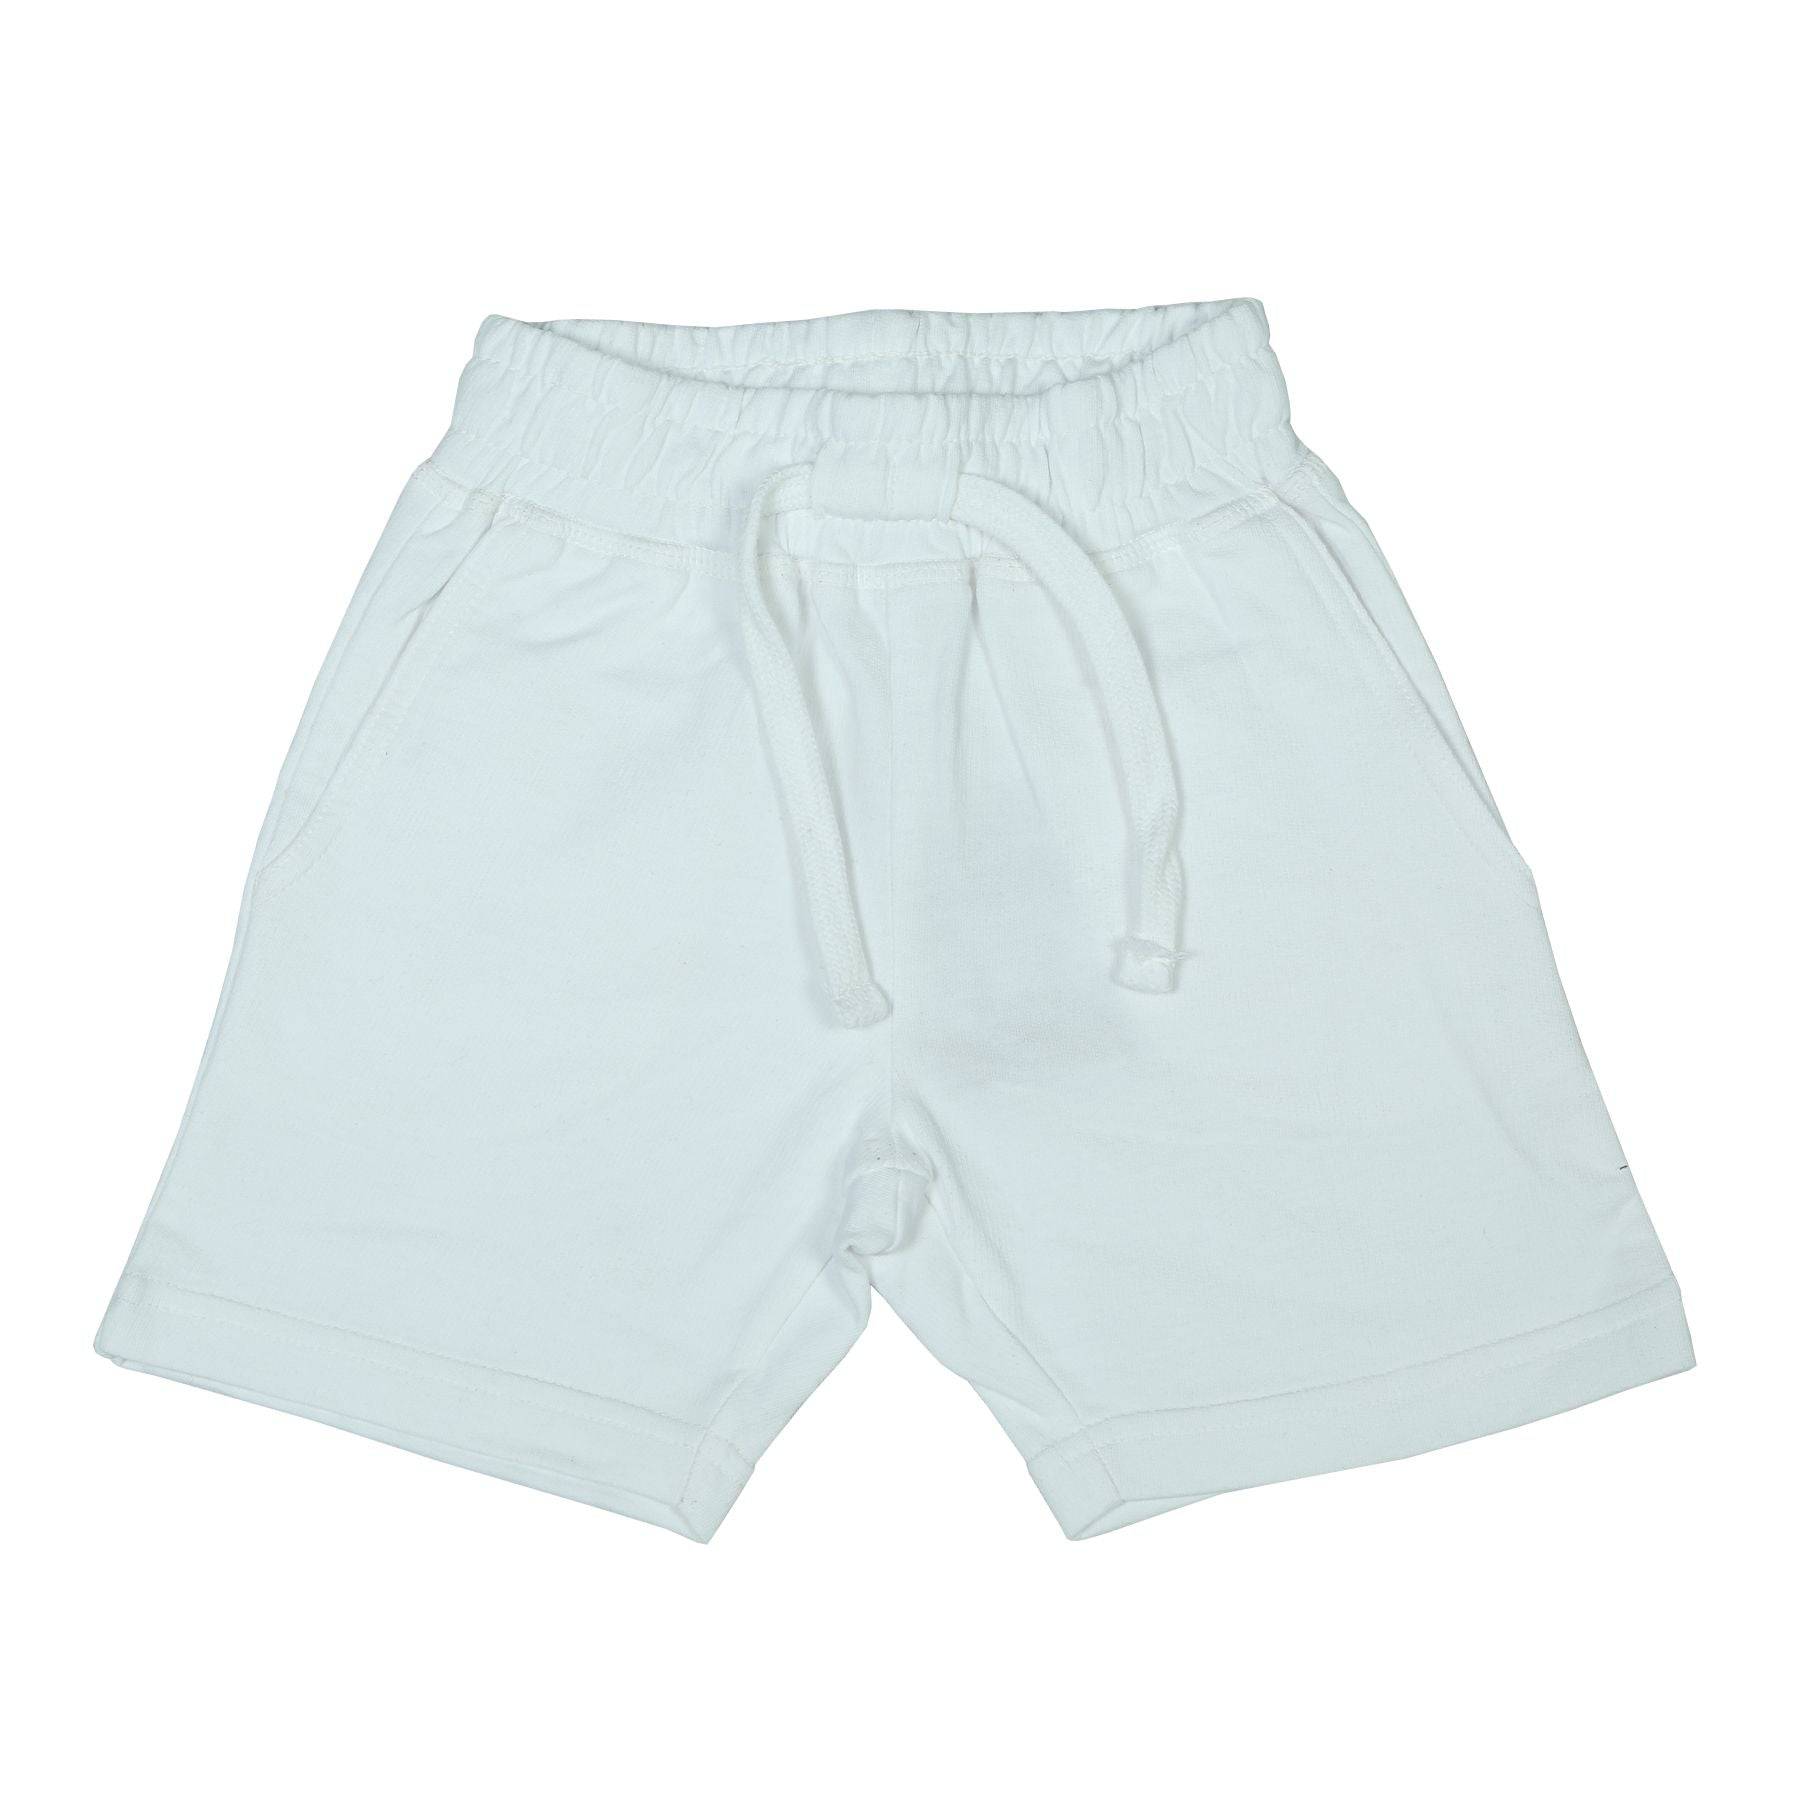 White Comfy Shorts - Twinkle Twinkle Little One